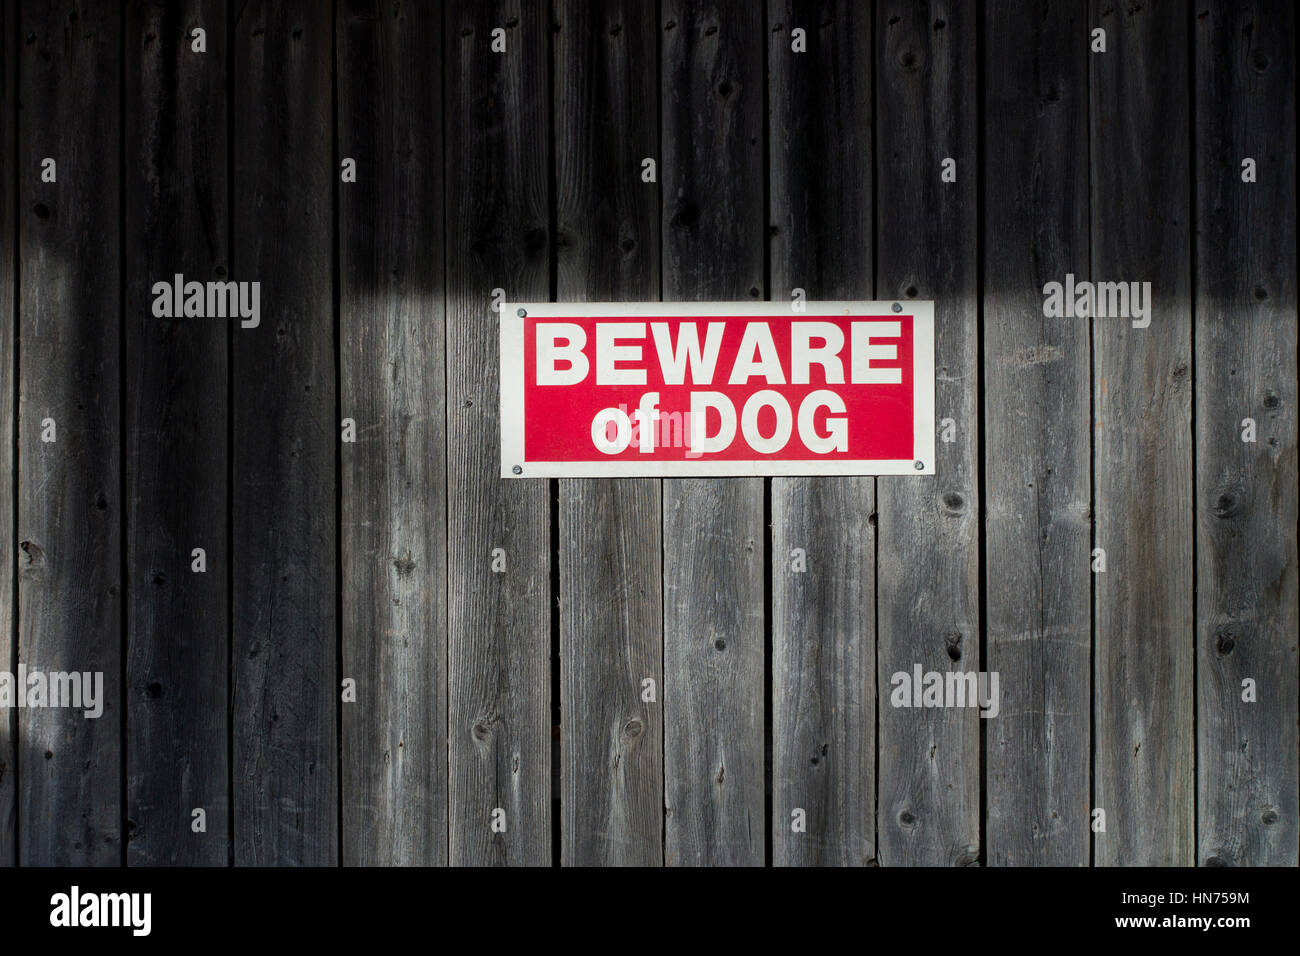 Beware of Dog sign posted on old wooden fence Stock Photo